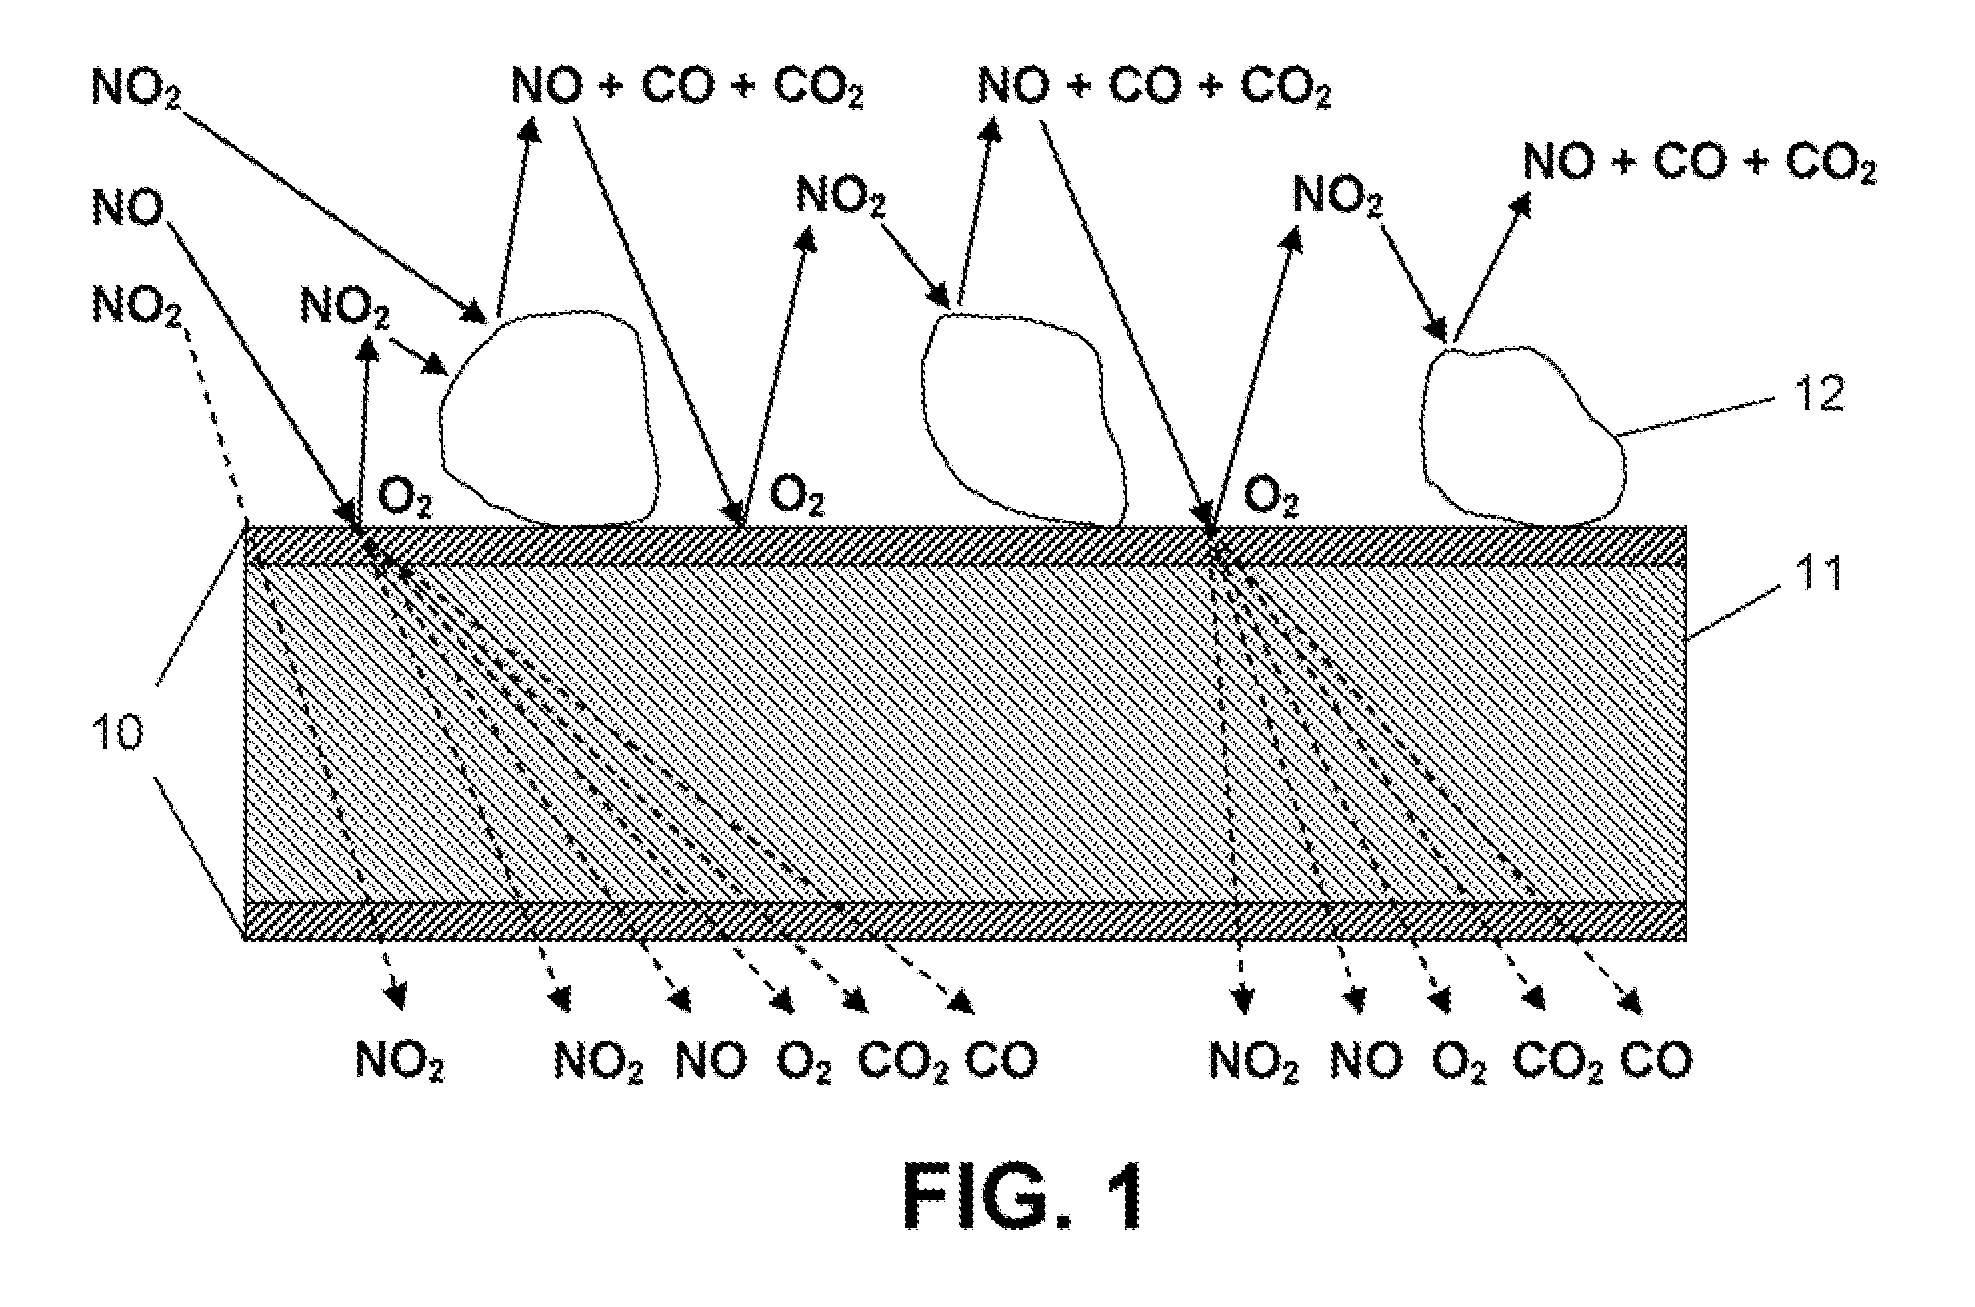 Method and apparatus for no2-based regeneration of diesel particulate filters using recirculated NOX